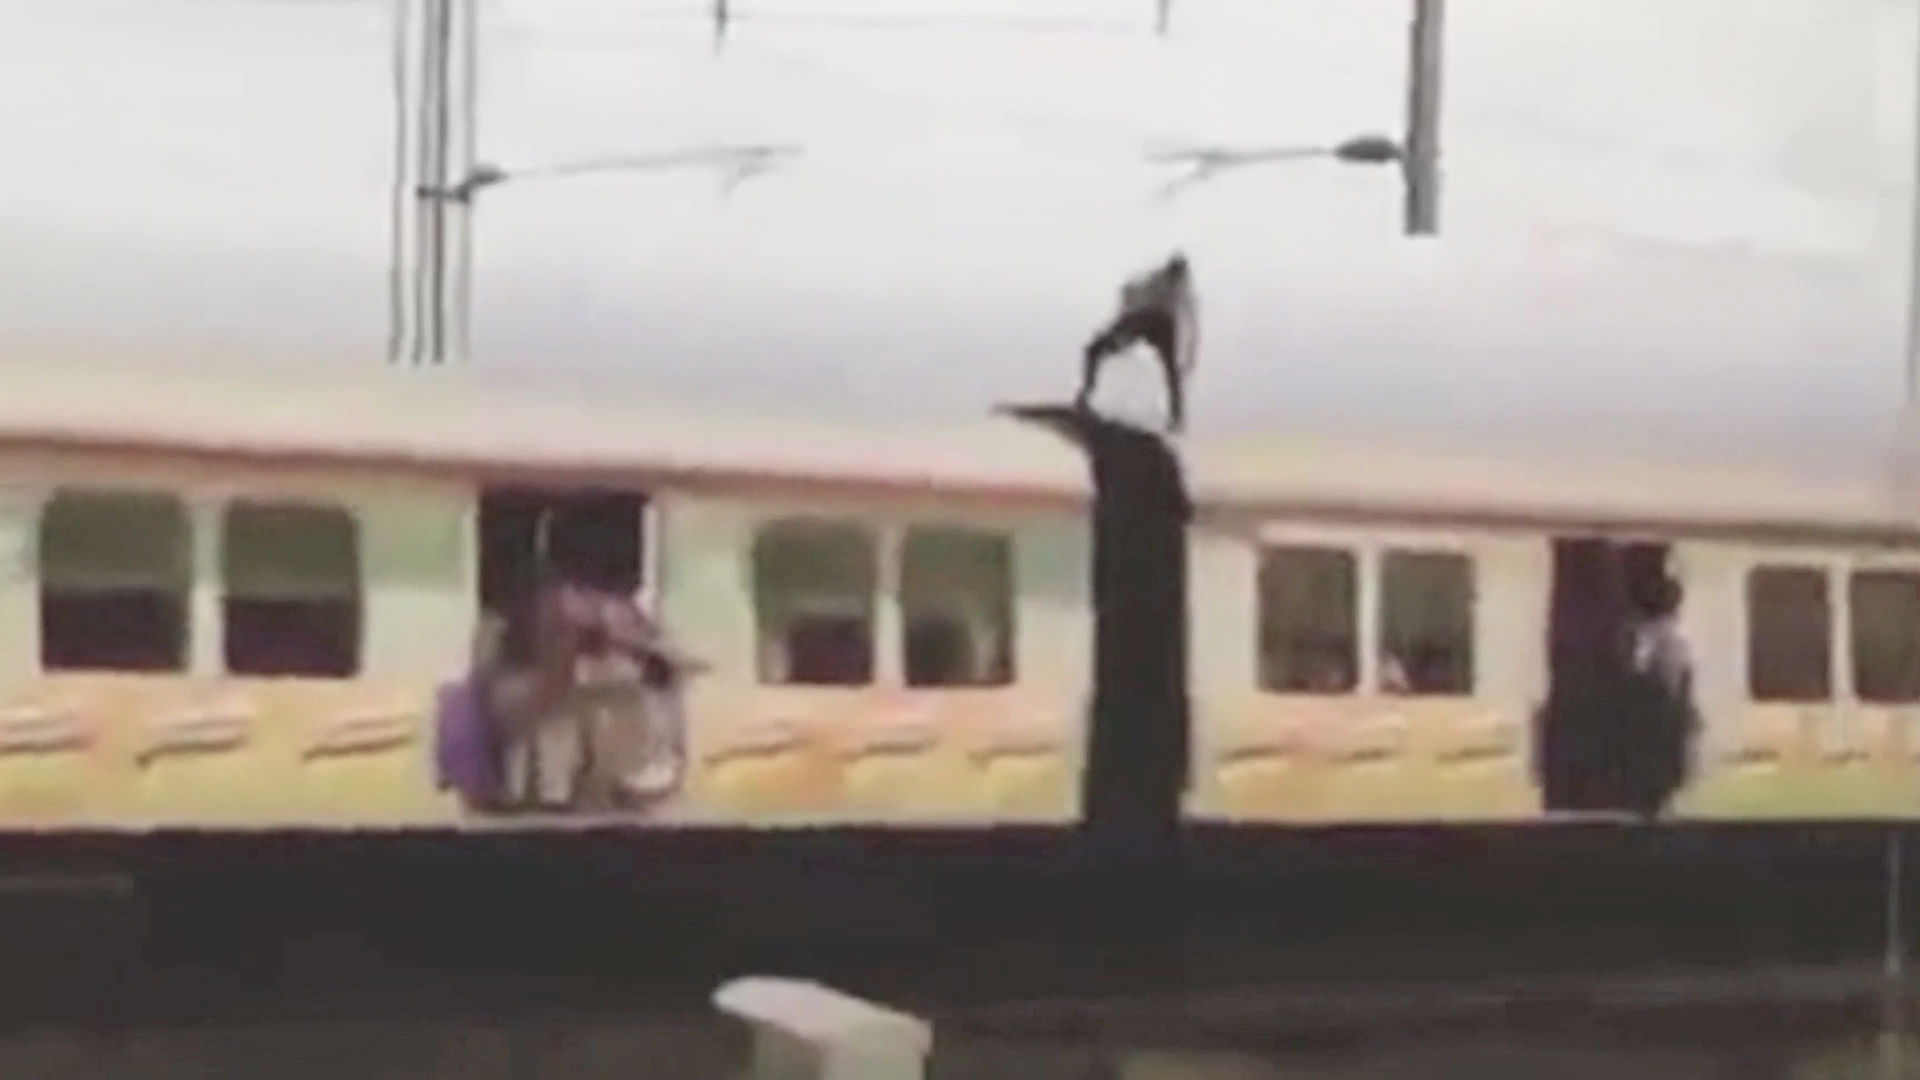 The man was dodging electrical cables as he stood on top of the moving train. (Photo: AP/Caters)